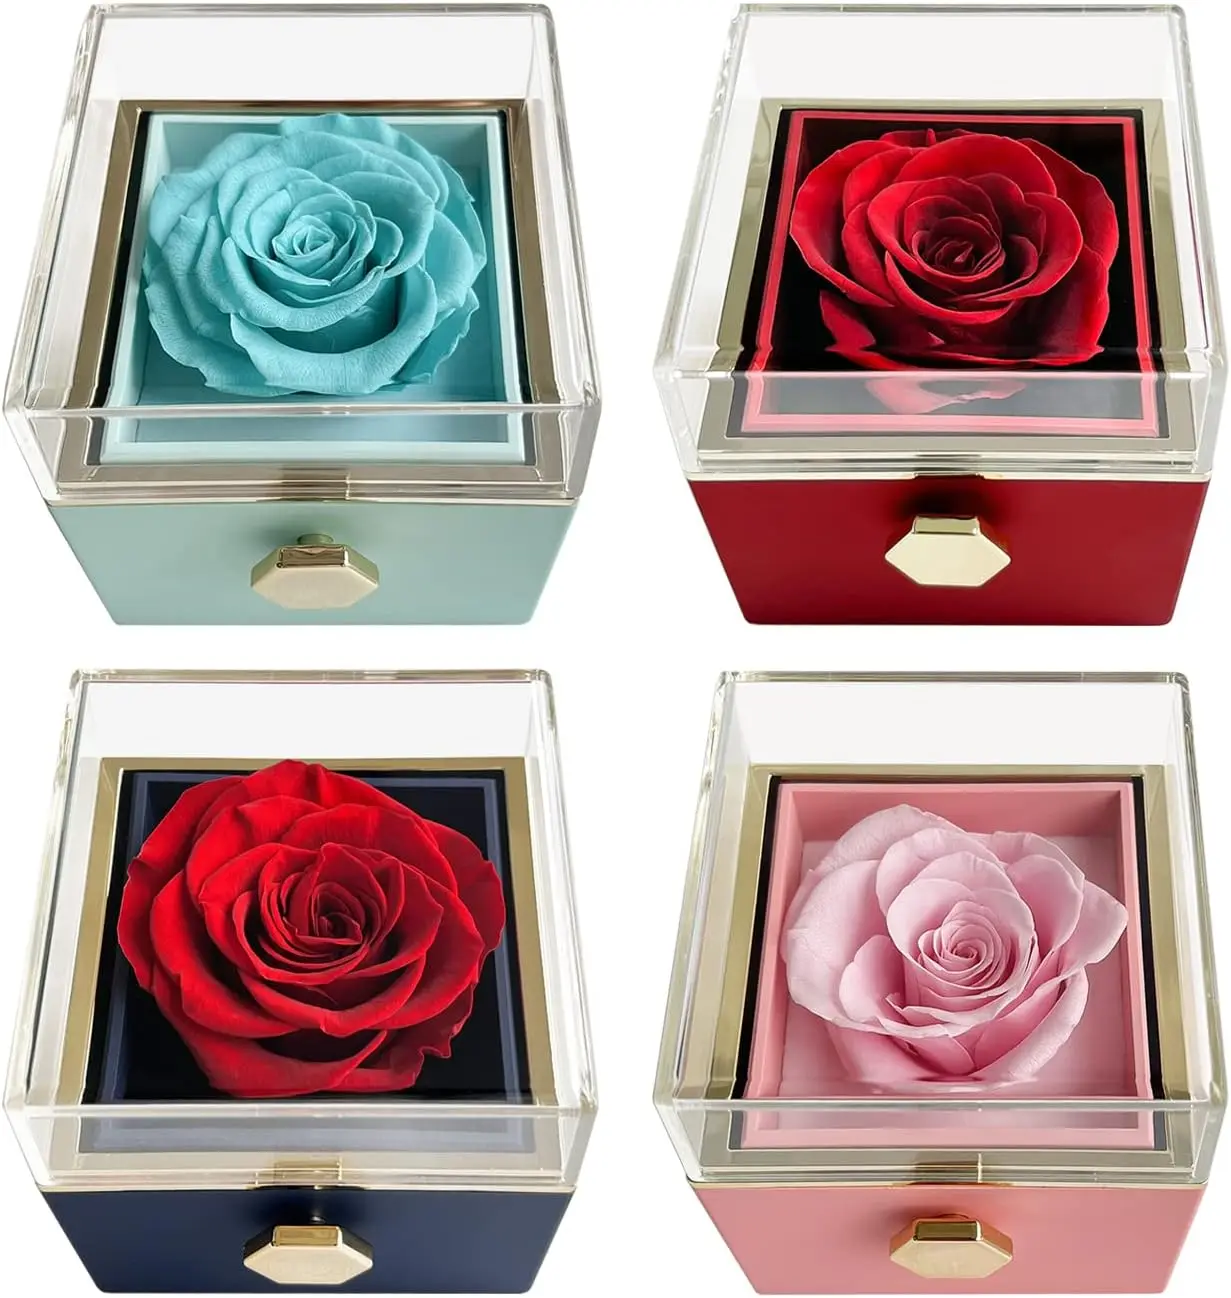 360 Degree Rotation Eternal Real Rose In Acrylic Gift Box Ring Locket  Jewelry Box Romantic Valentine's Day Mother's Day Present